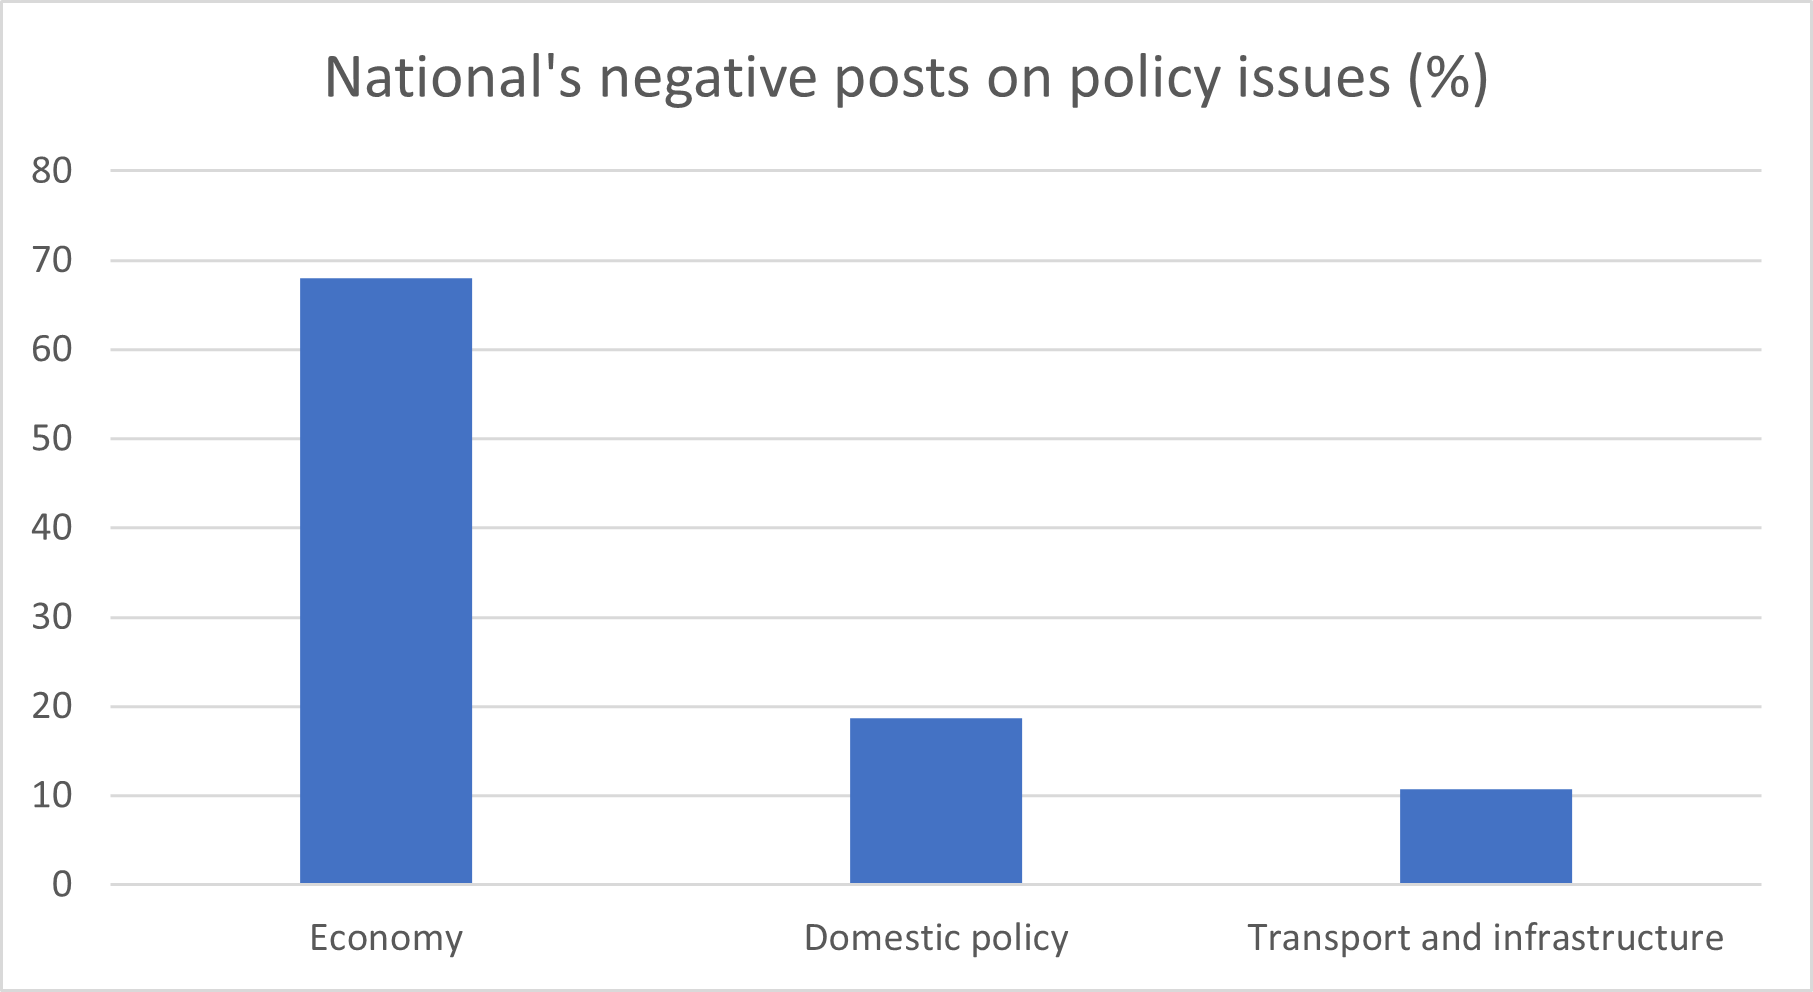 Negative posts on policy by National